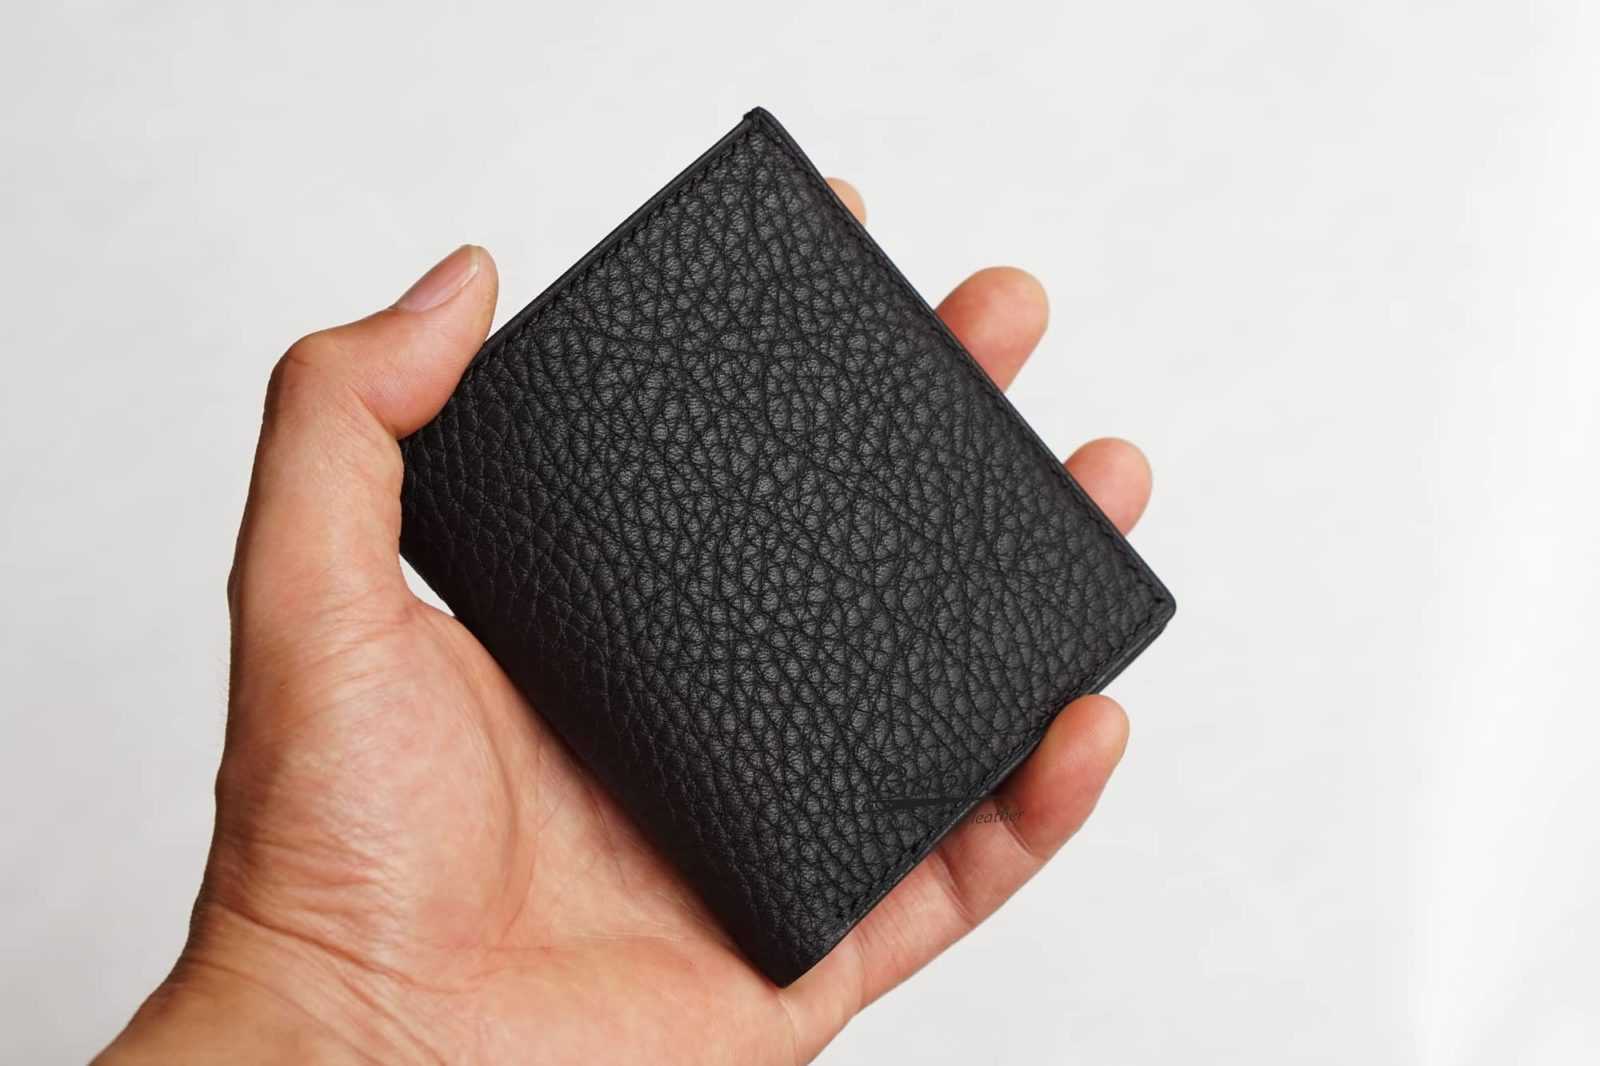 Handmade Togo leather wallet, High Quality mini leather wallet WL306